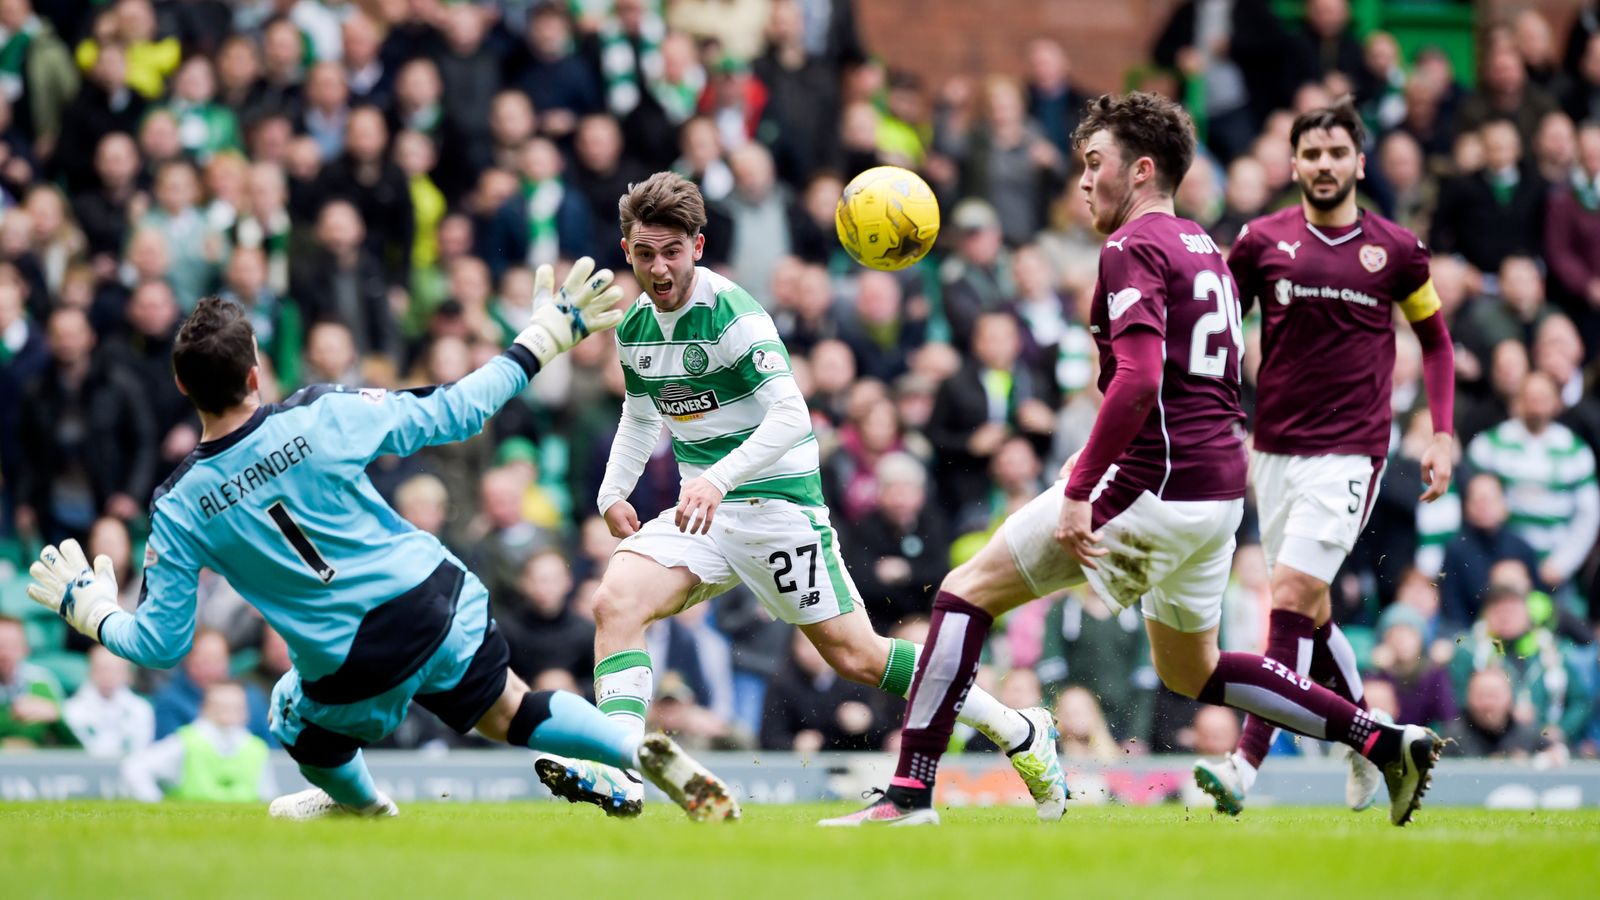 Celtic 3 - 1 Hearts - Match Report & Highlights